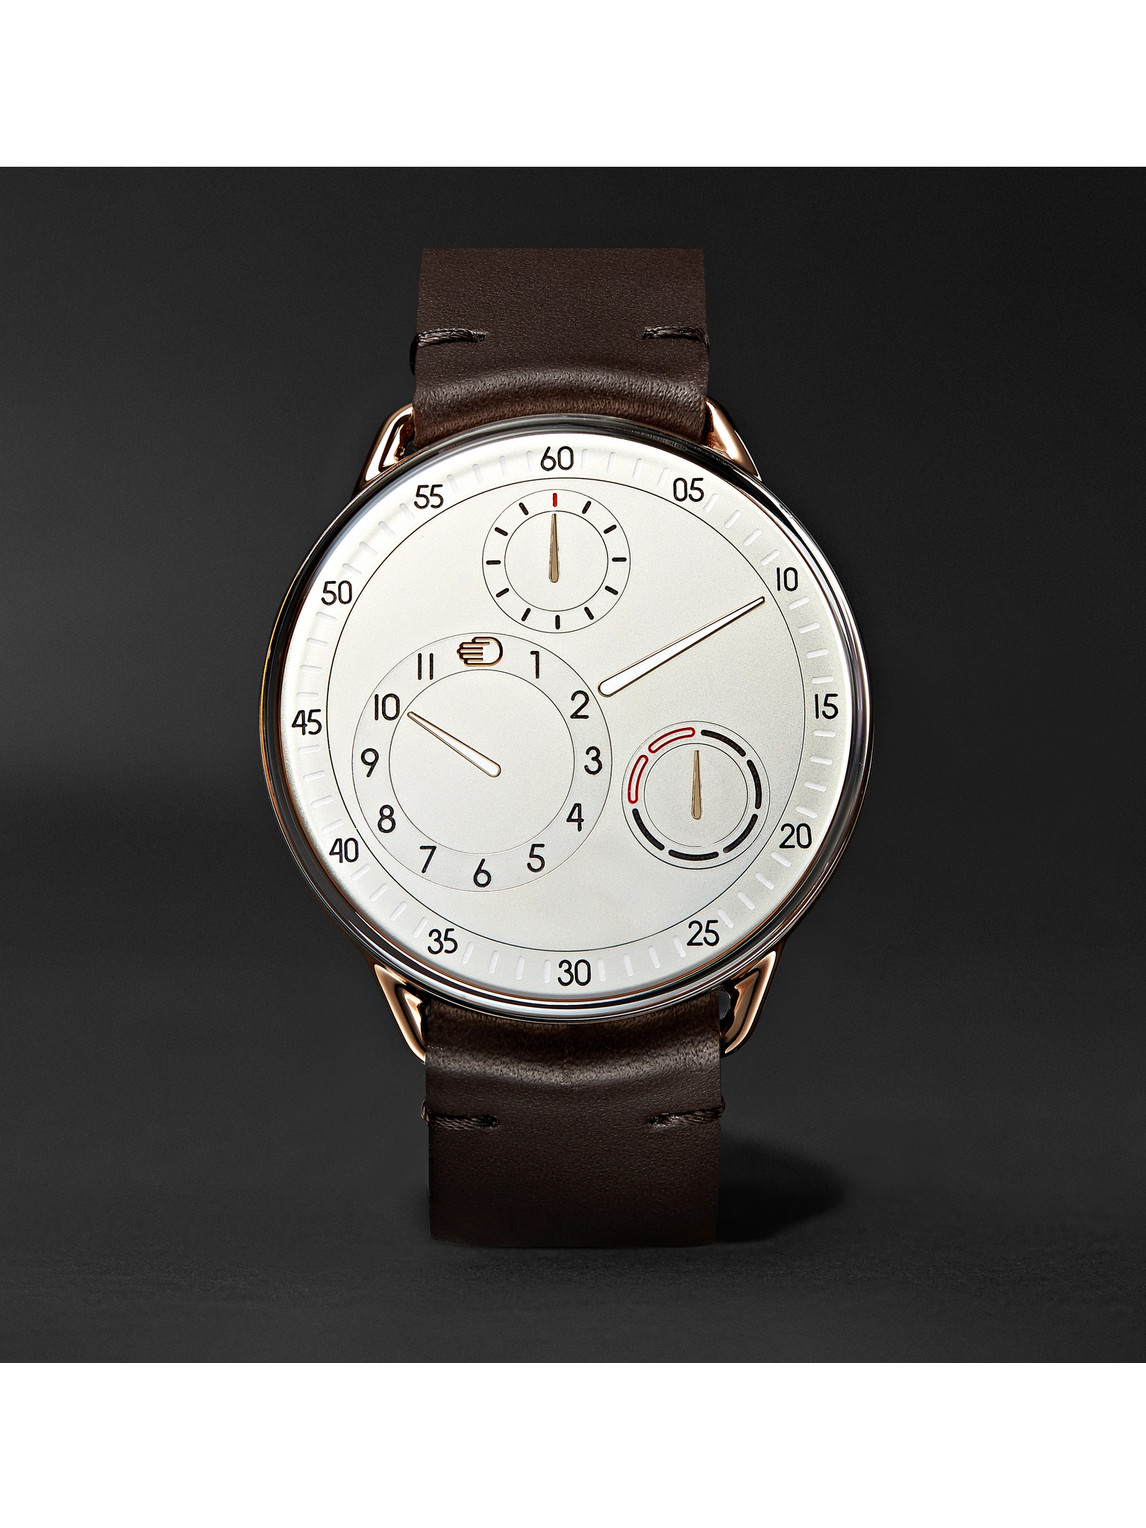 Ressence Type 1 Mrp 42mm Rose Gold, Titanium And Leather Watch, Ref. No. Type 1rg In White